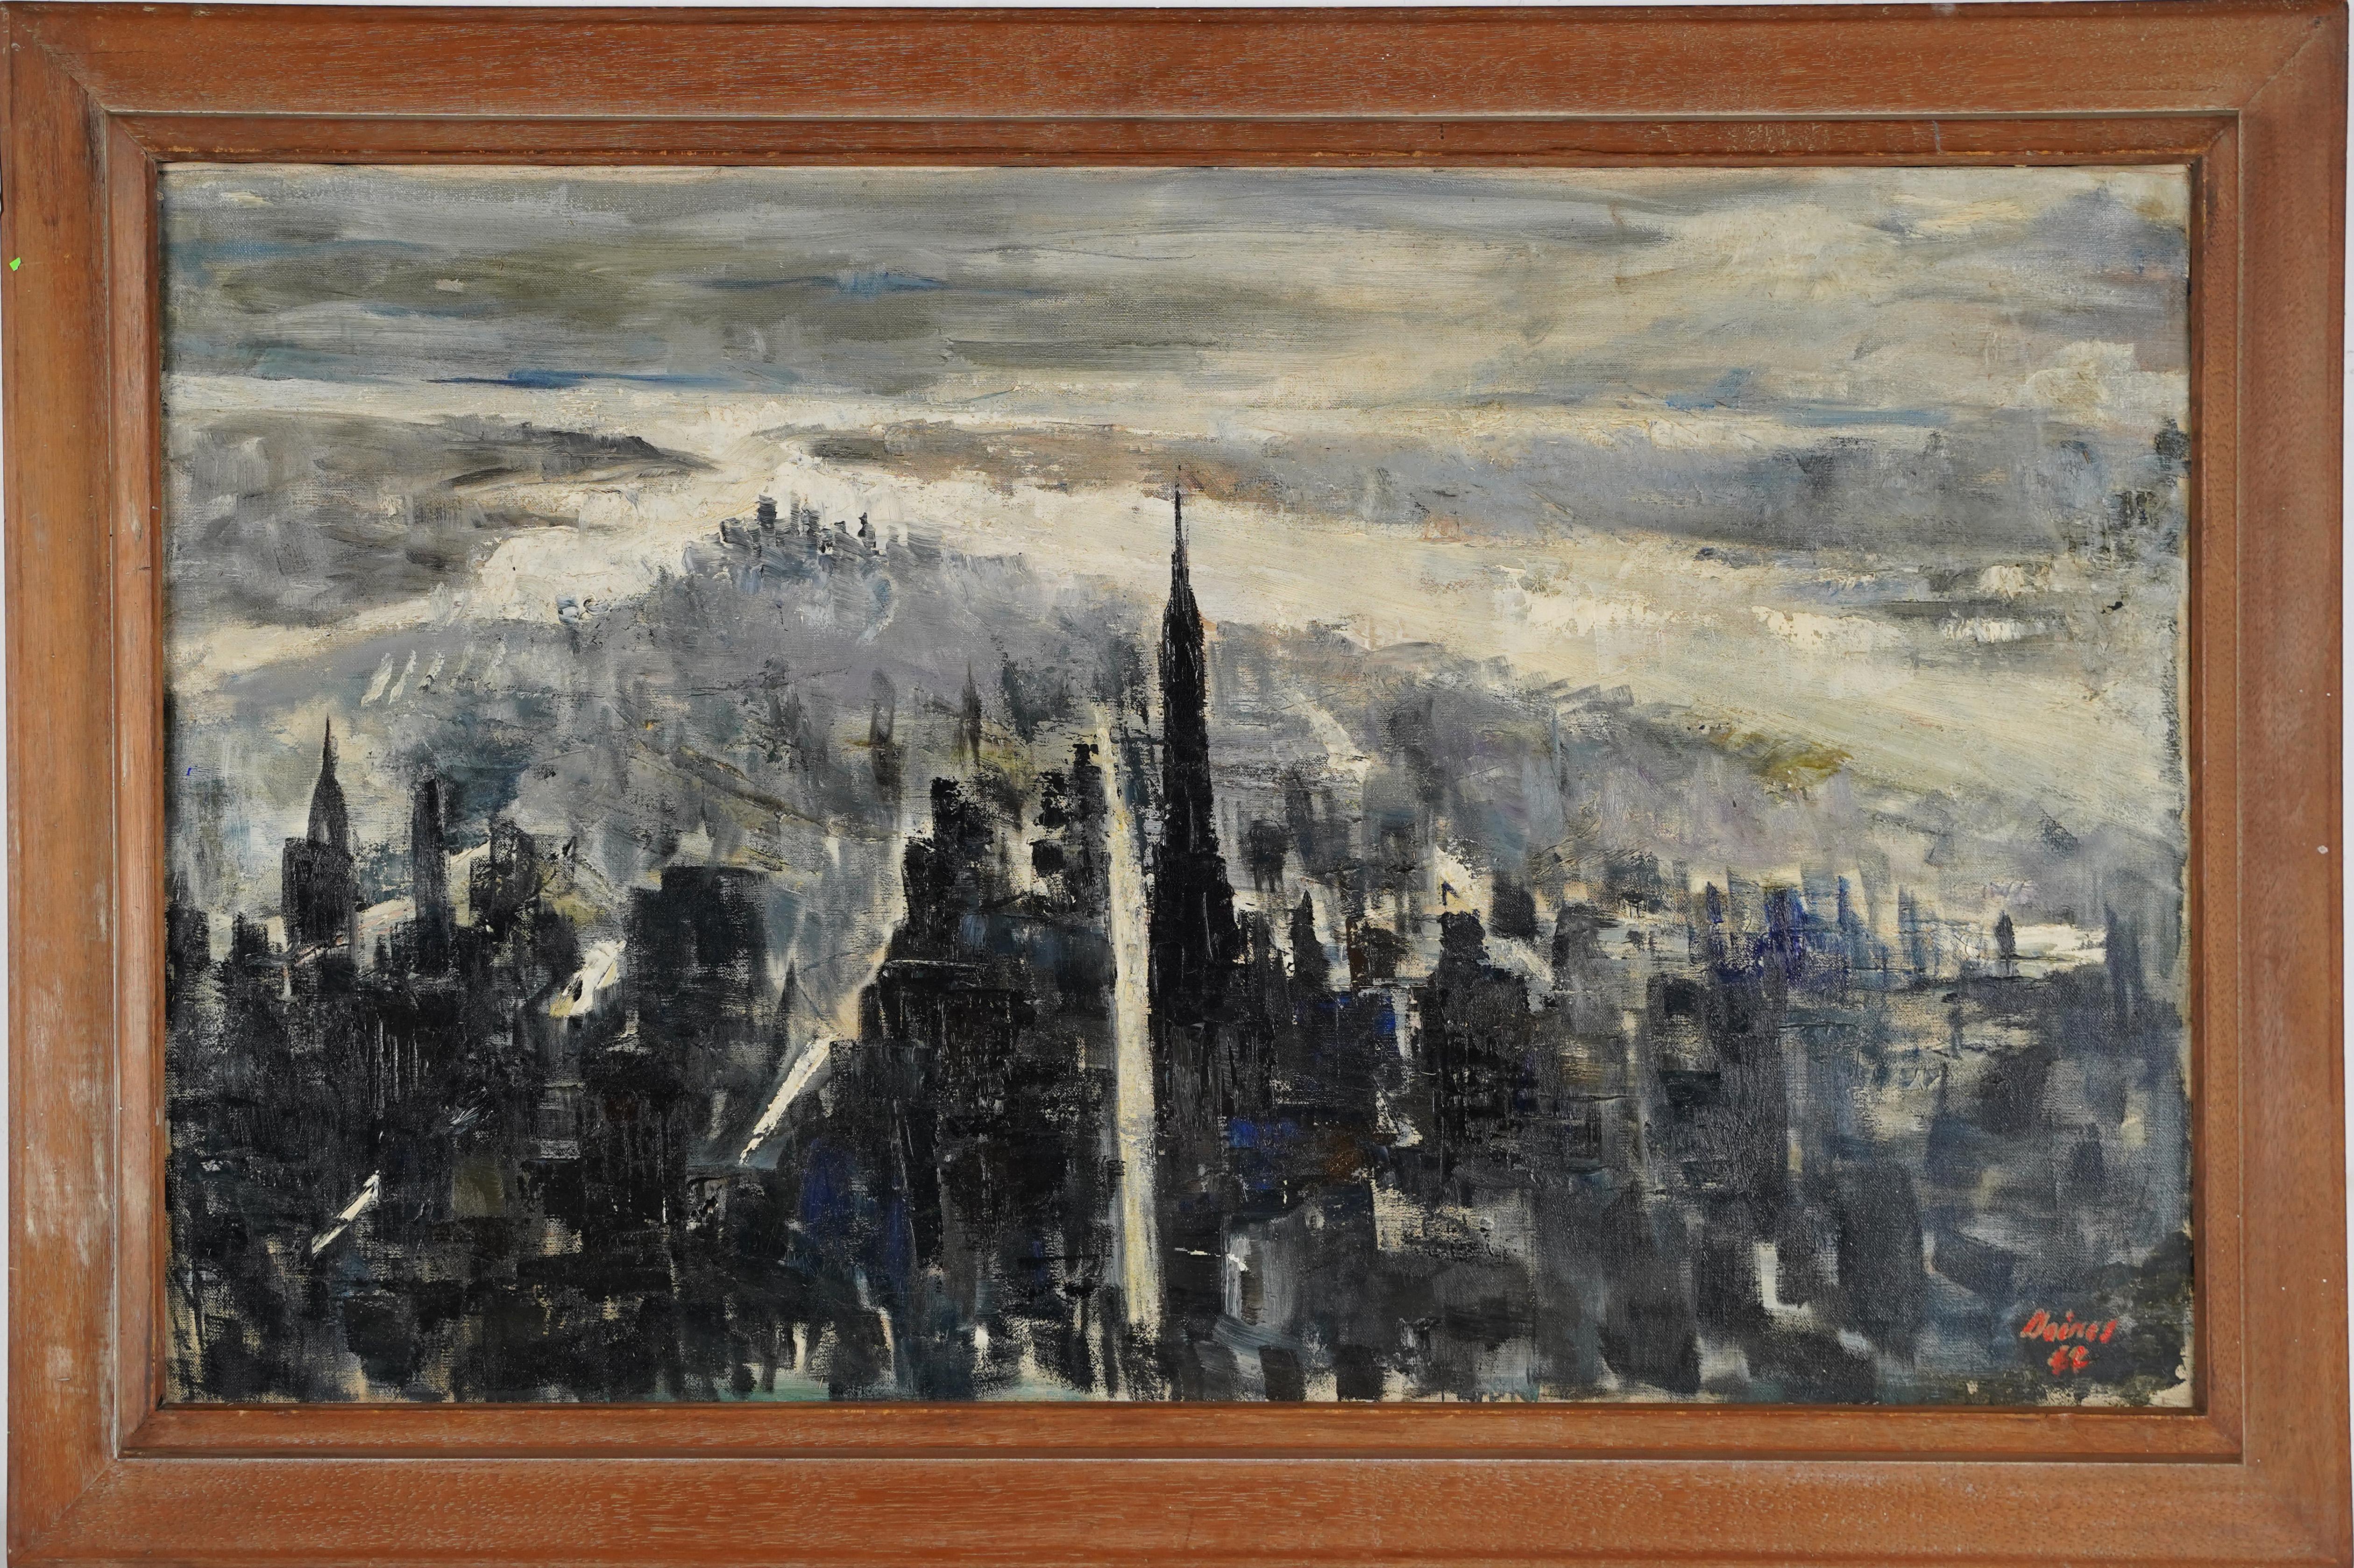 Unknown Landscape Painting - Large American Modernist New York City Skyline Abstract Original Oil Painting